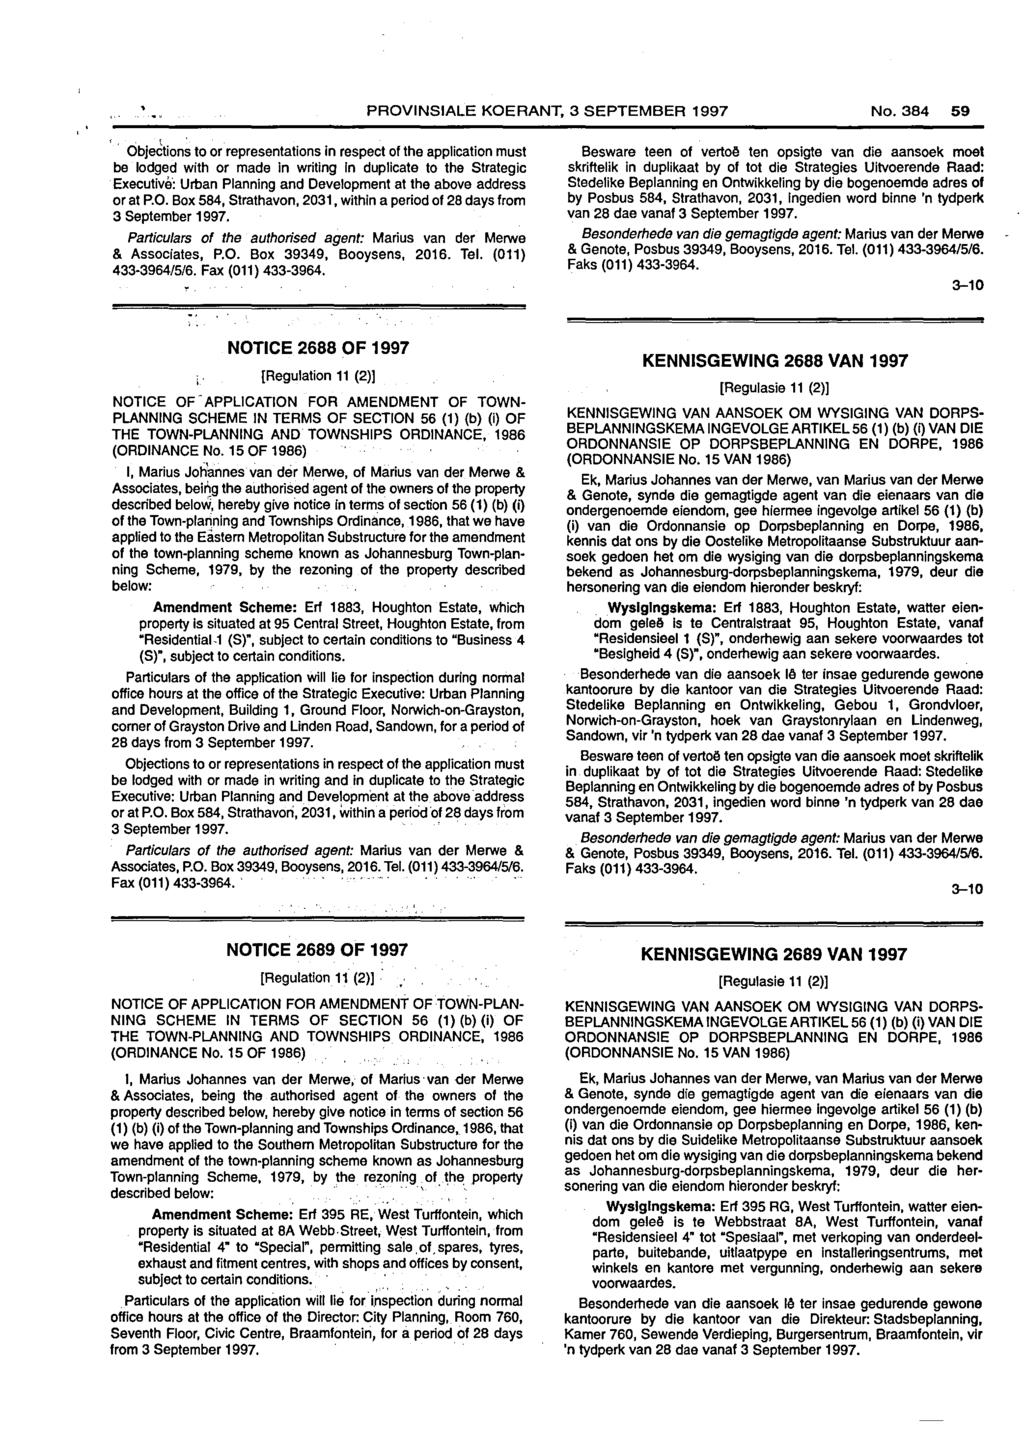 PROVINSIALE KOERANT, 3 SEPTEMBER 1997 No. 59 t. be lodged with or made In writing In duplicate to the Strategic Executivii: Urban Planning and Development at the above address or at P.O. Box 584, Strathavon, 2031, within a period of 28 days from Particulars of the authorised agent: Marius van dar Merwe & Associates, P.